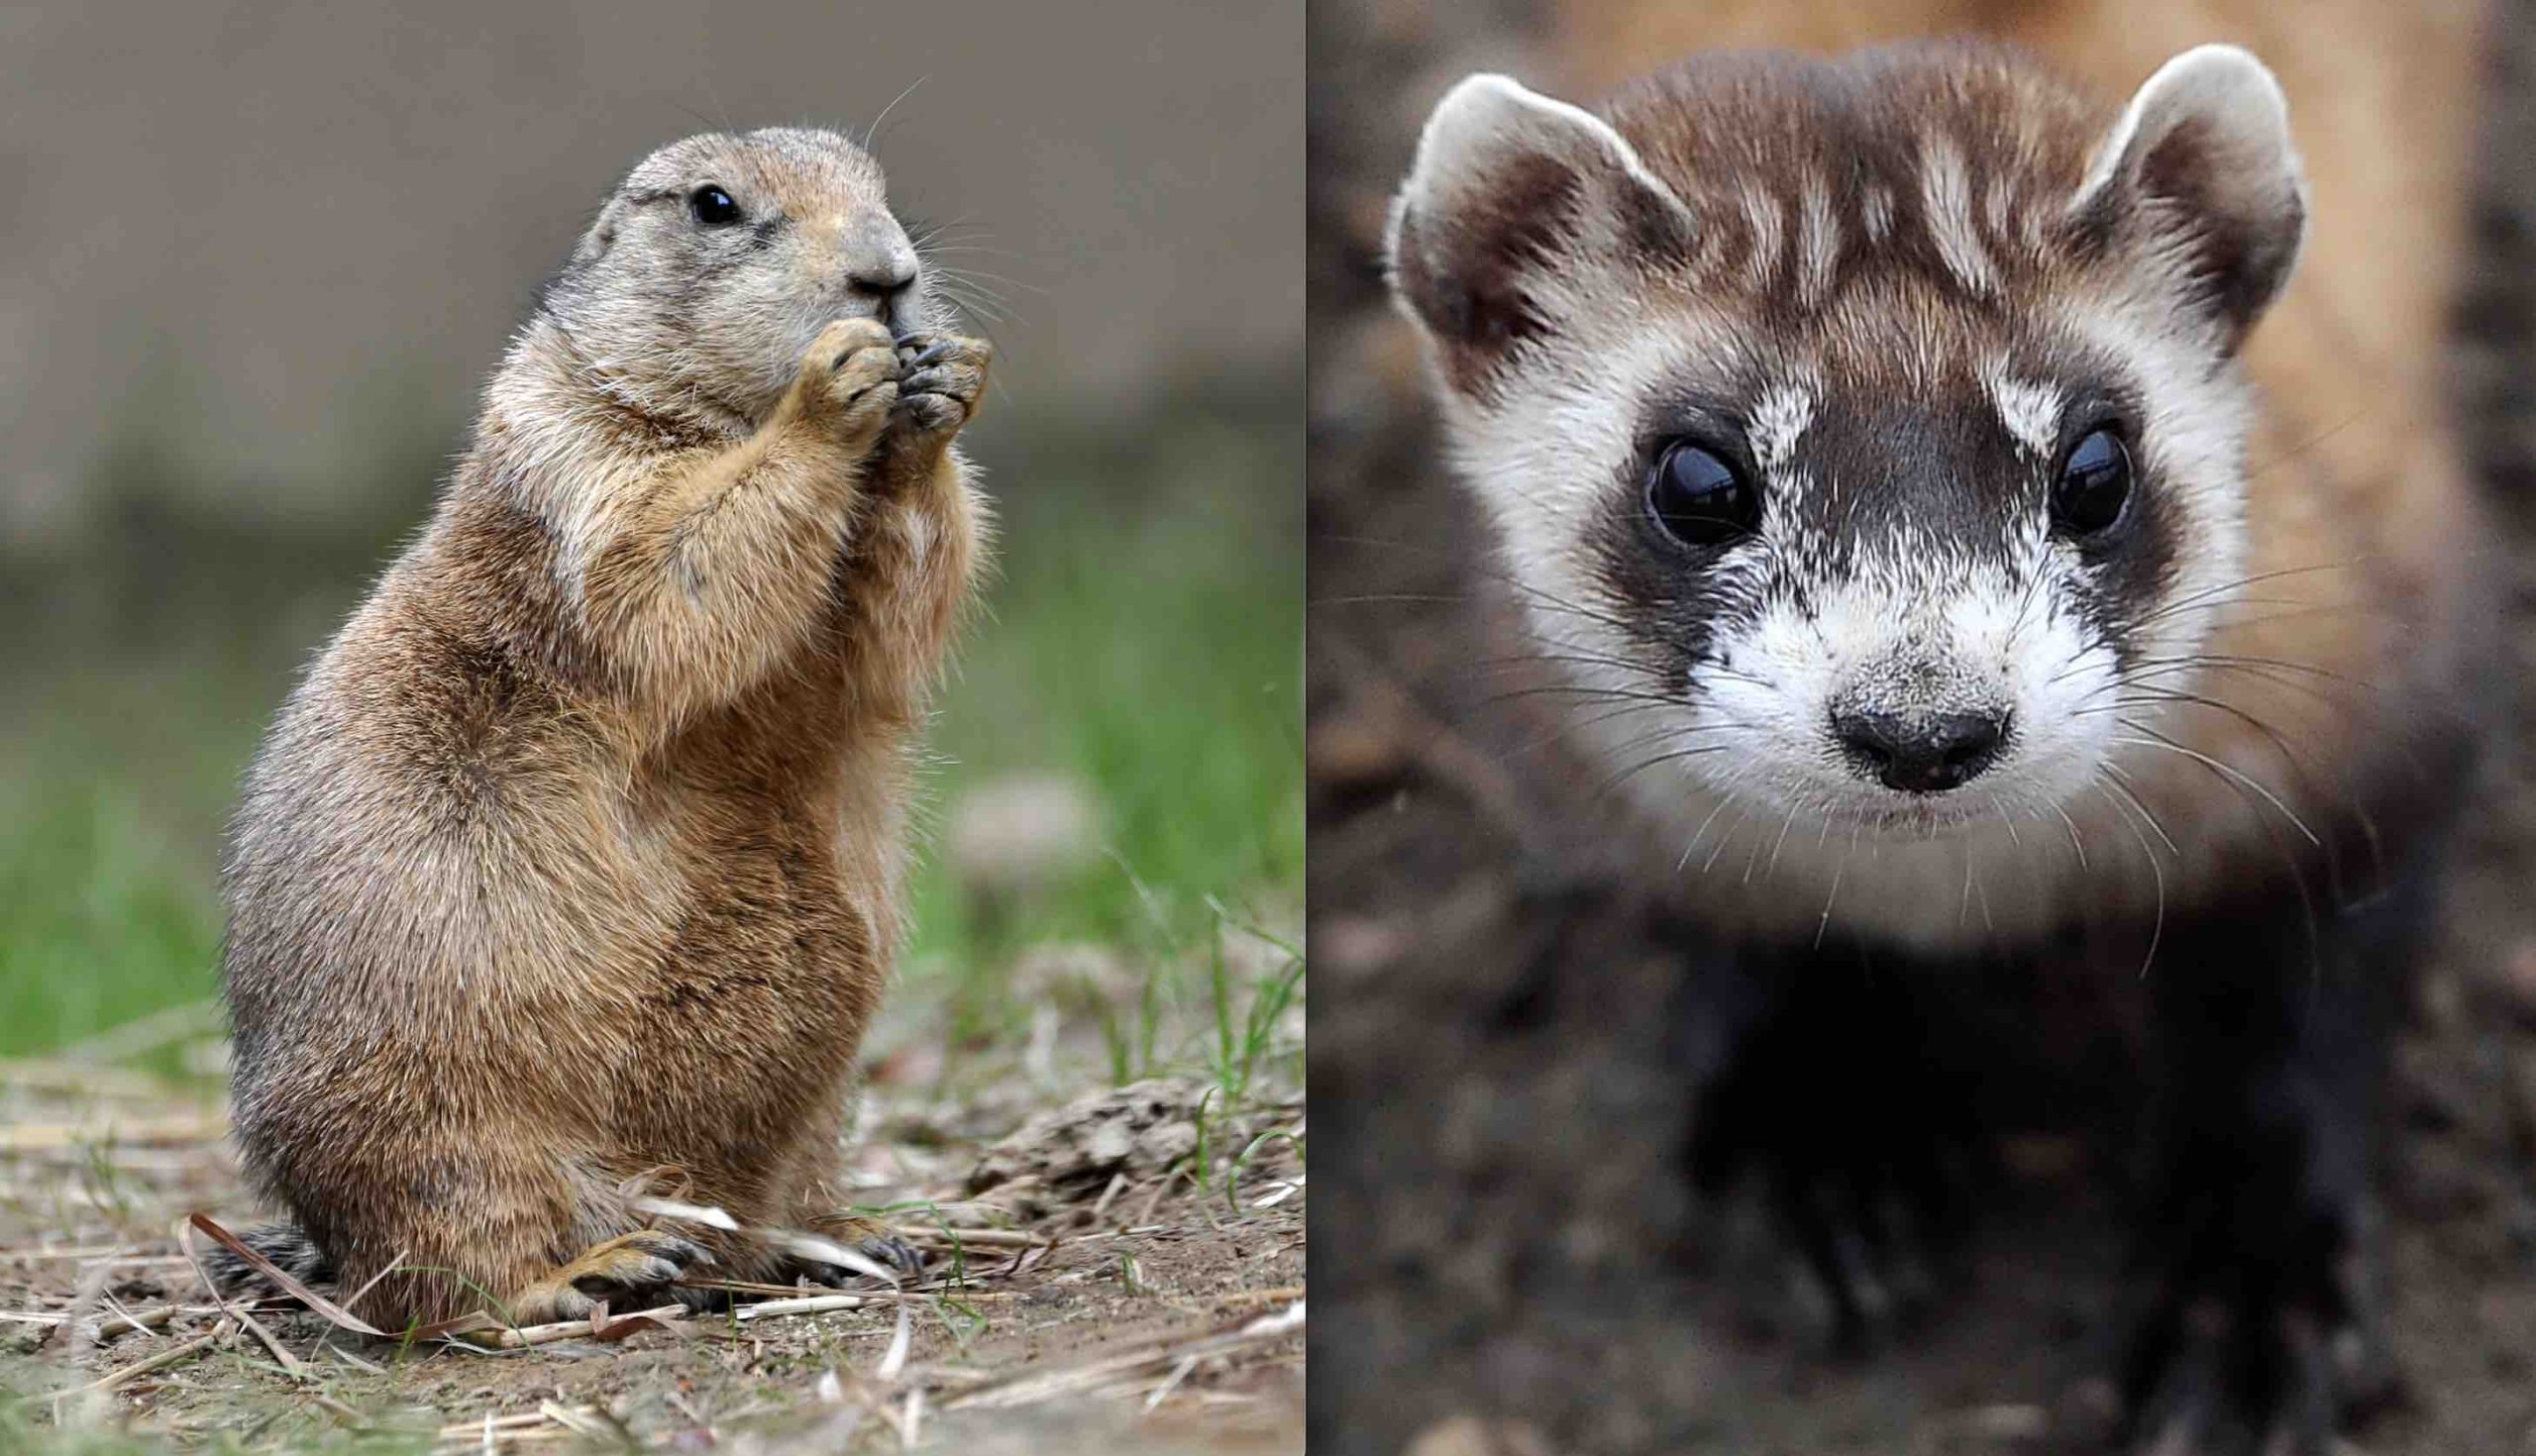 Forest Service Prairie Dog Extermination Plan Could Cause Extinction of Black-Footed Ferret, Enviro Orgs Say; Lawsuit Filed